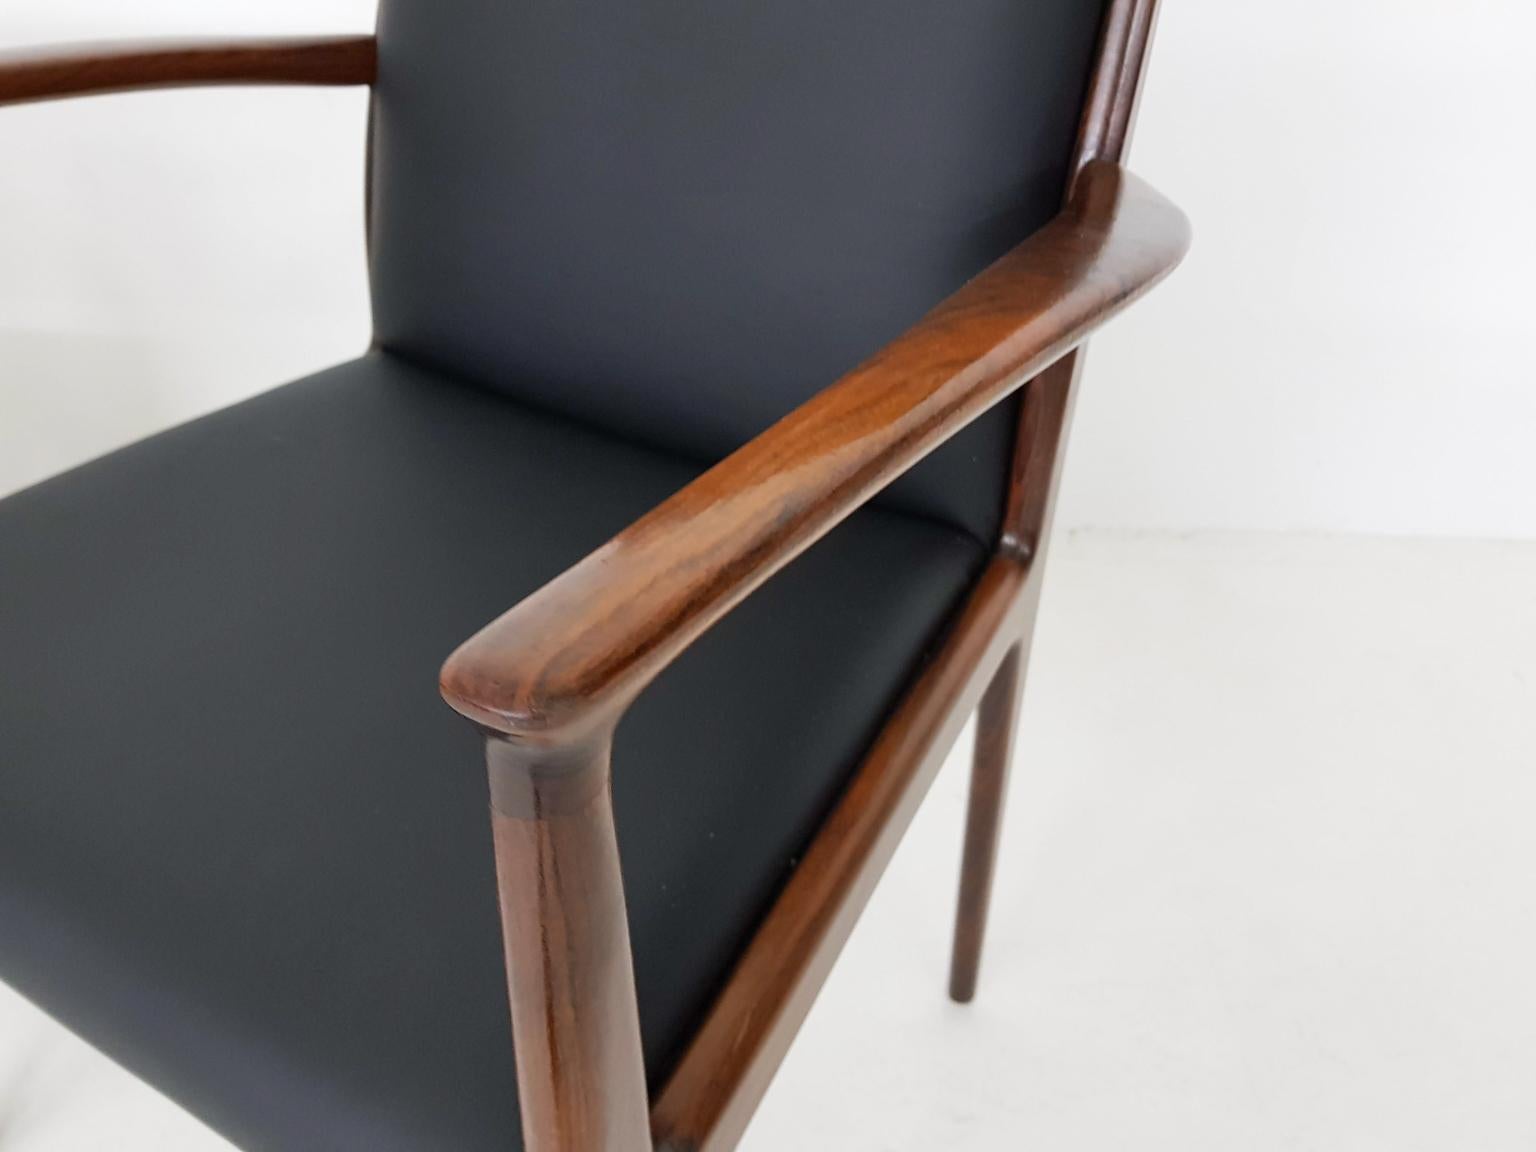 Scandinavian Modern Set of 4 Rosewood and Black Leather Dining Chairs, Danish Modern, 1950s For Sale